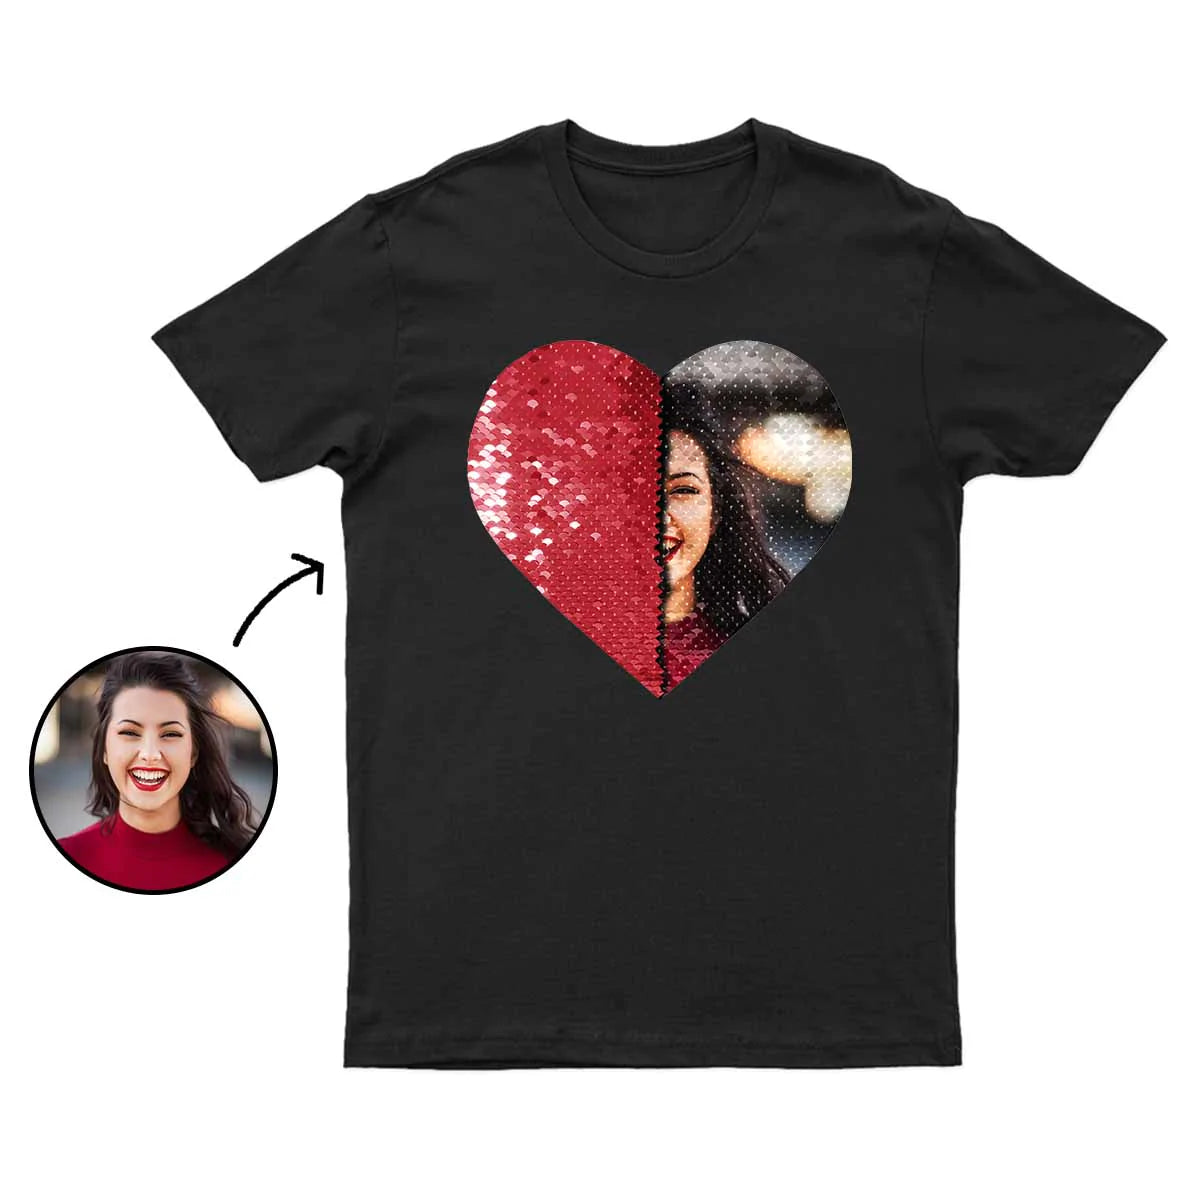 Custom Flip Sequin Shirt (Heart) - Personalized Heart Shaped Sequin With Picture Unisex Shirt - Reversible Sequin T shirt